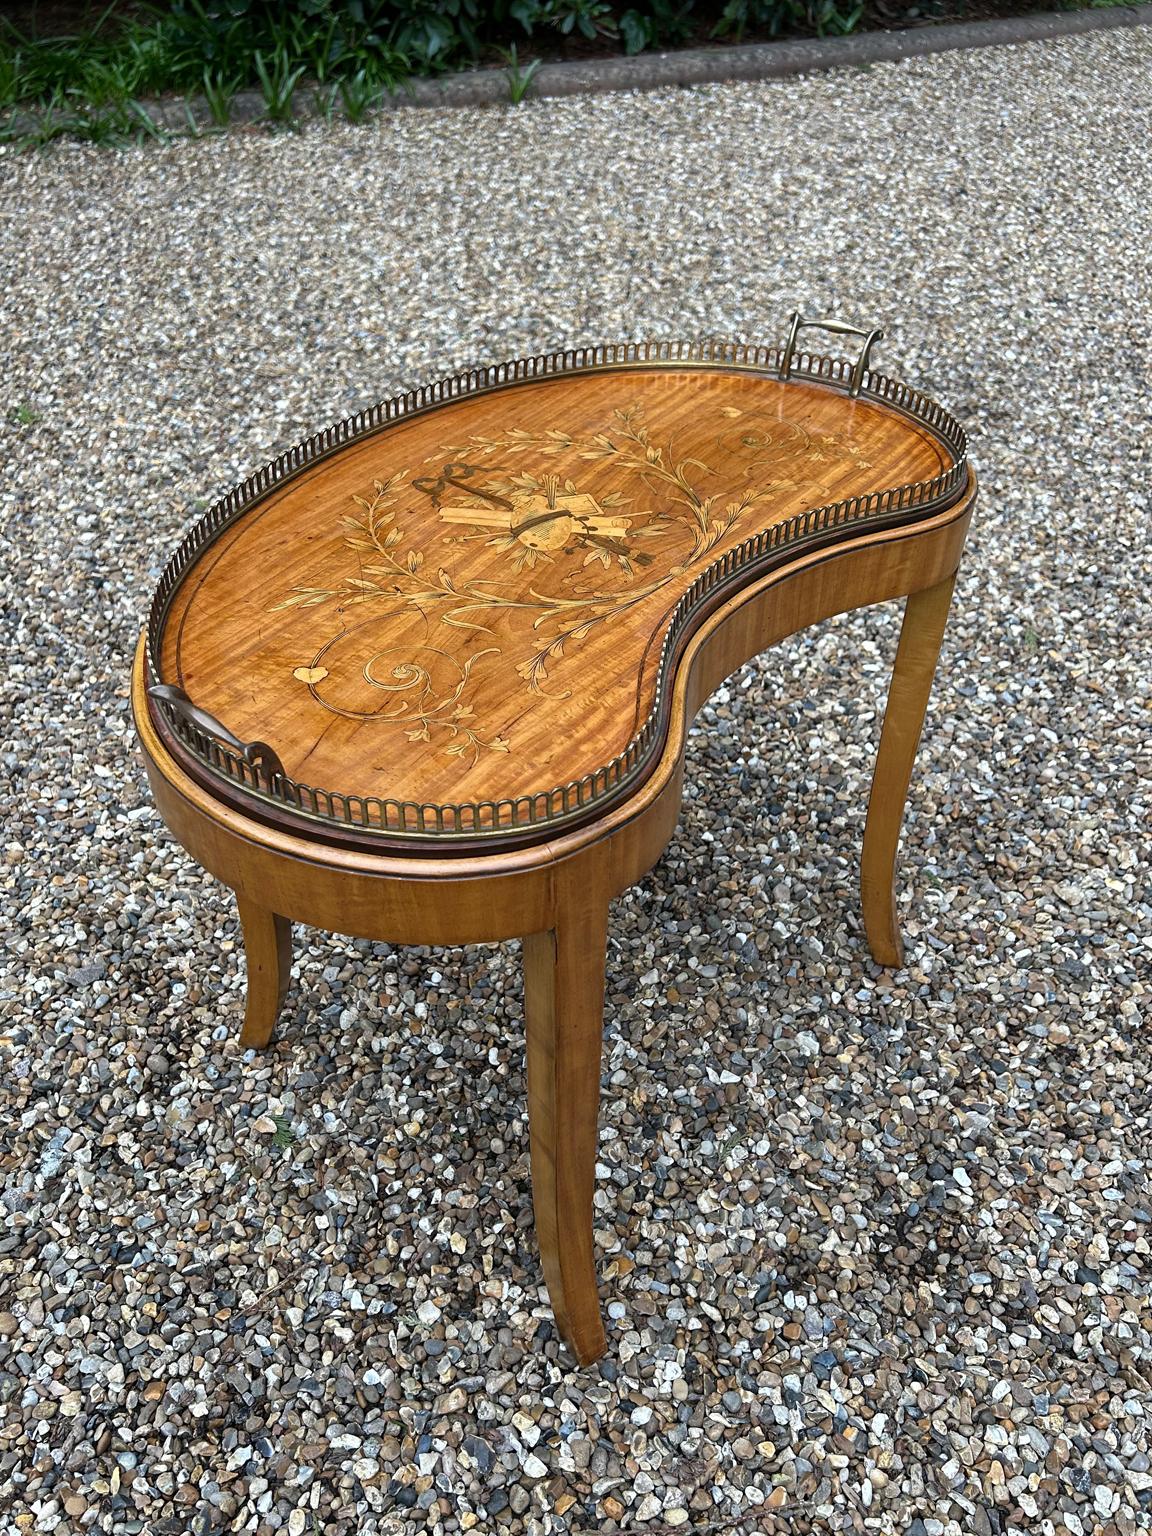 English 19th Century Inlaid Satinwood Tray on (Stand made later) For Sale